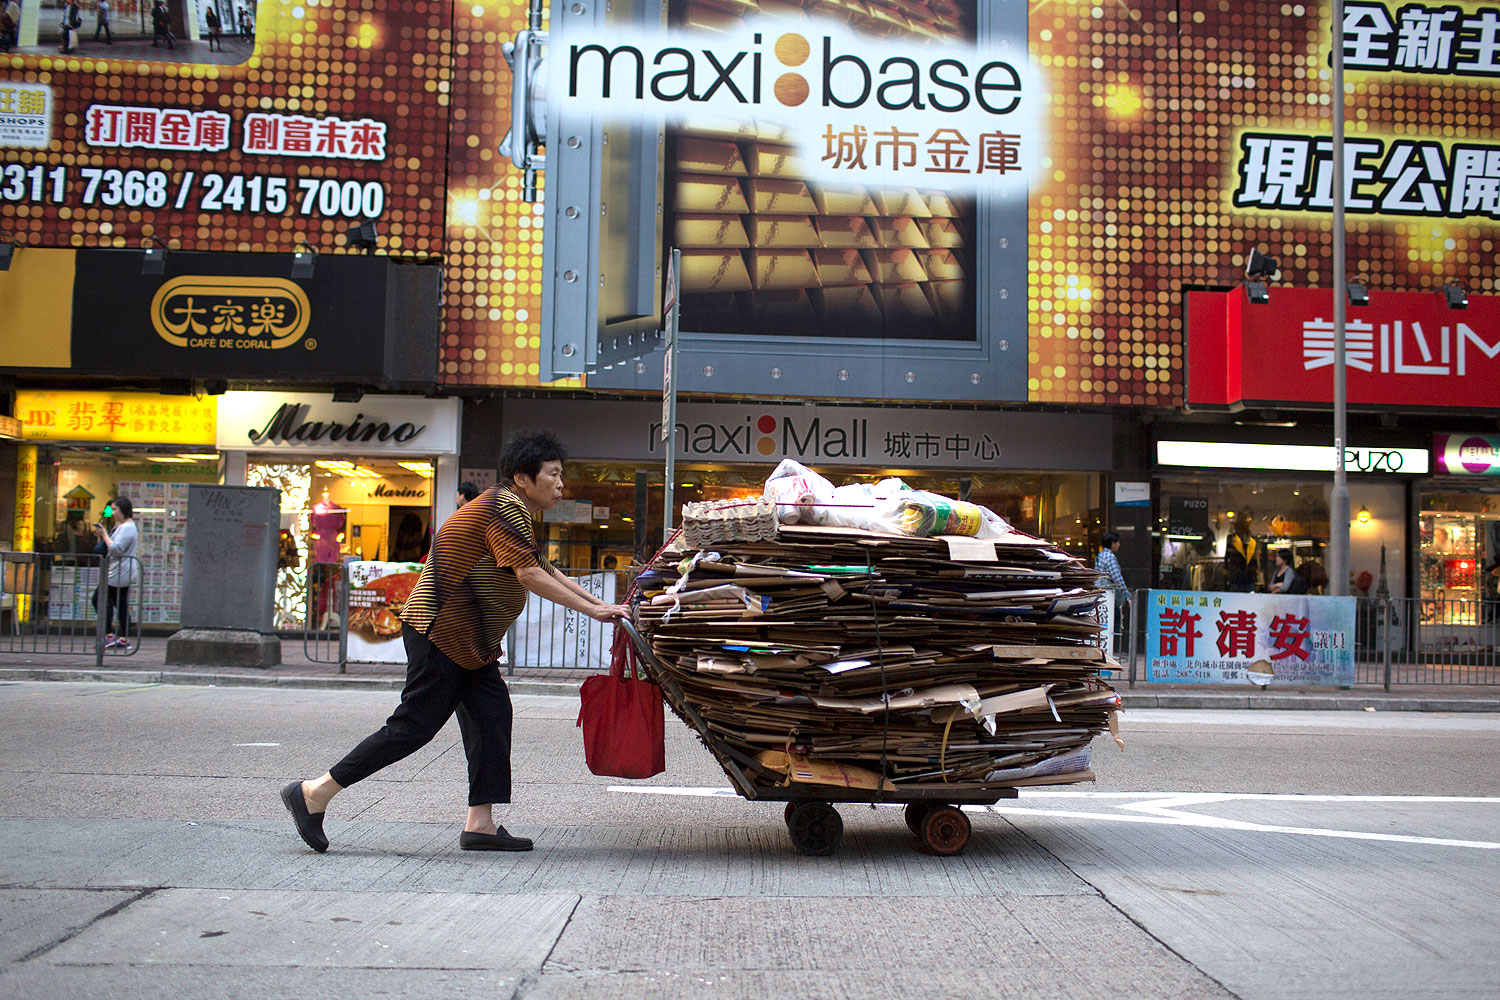 An elderly woman pushes a cart filled with cardboard for recycling in the North Point area of Hong Kong, China, on Oct. 18, 2013 (Brent Lewin / Bloomberg / Getty Images)